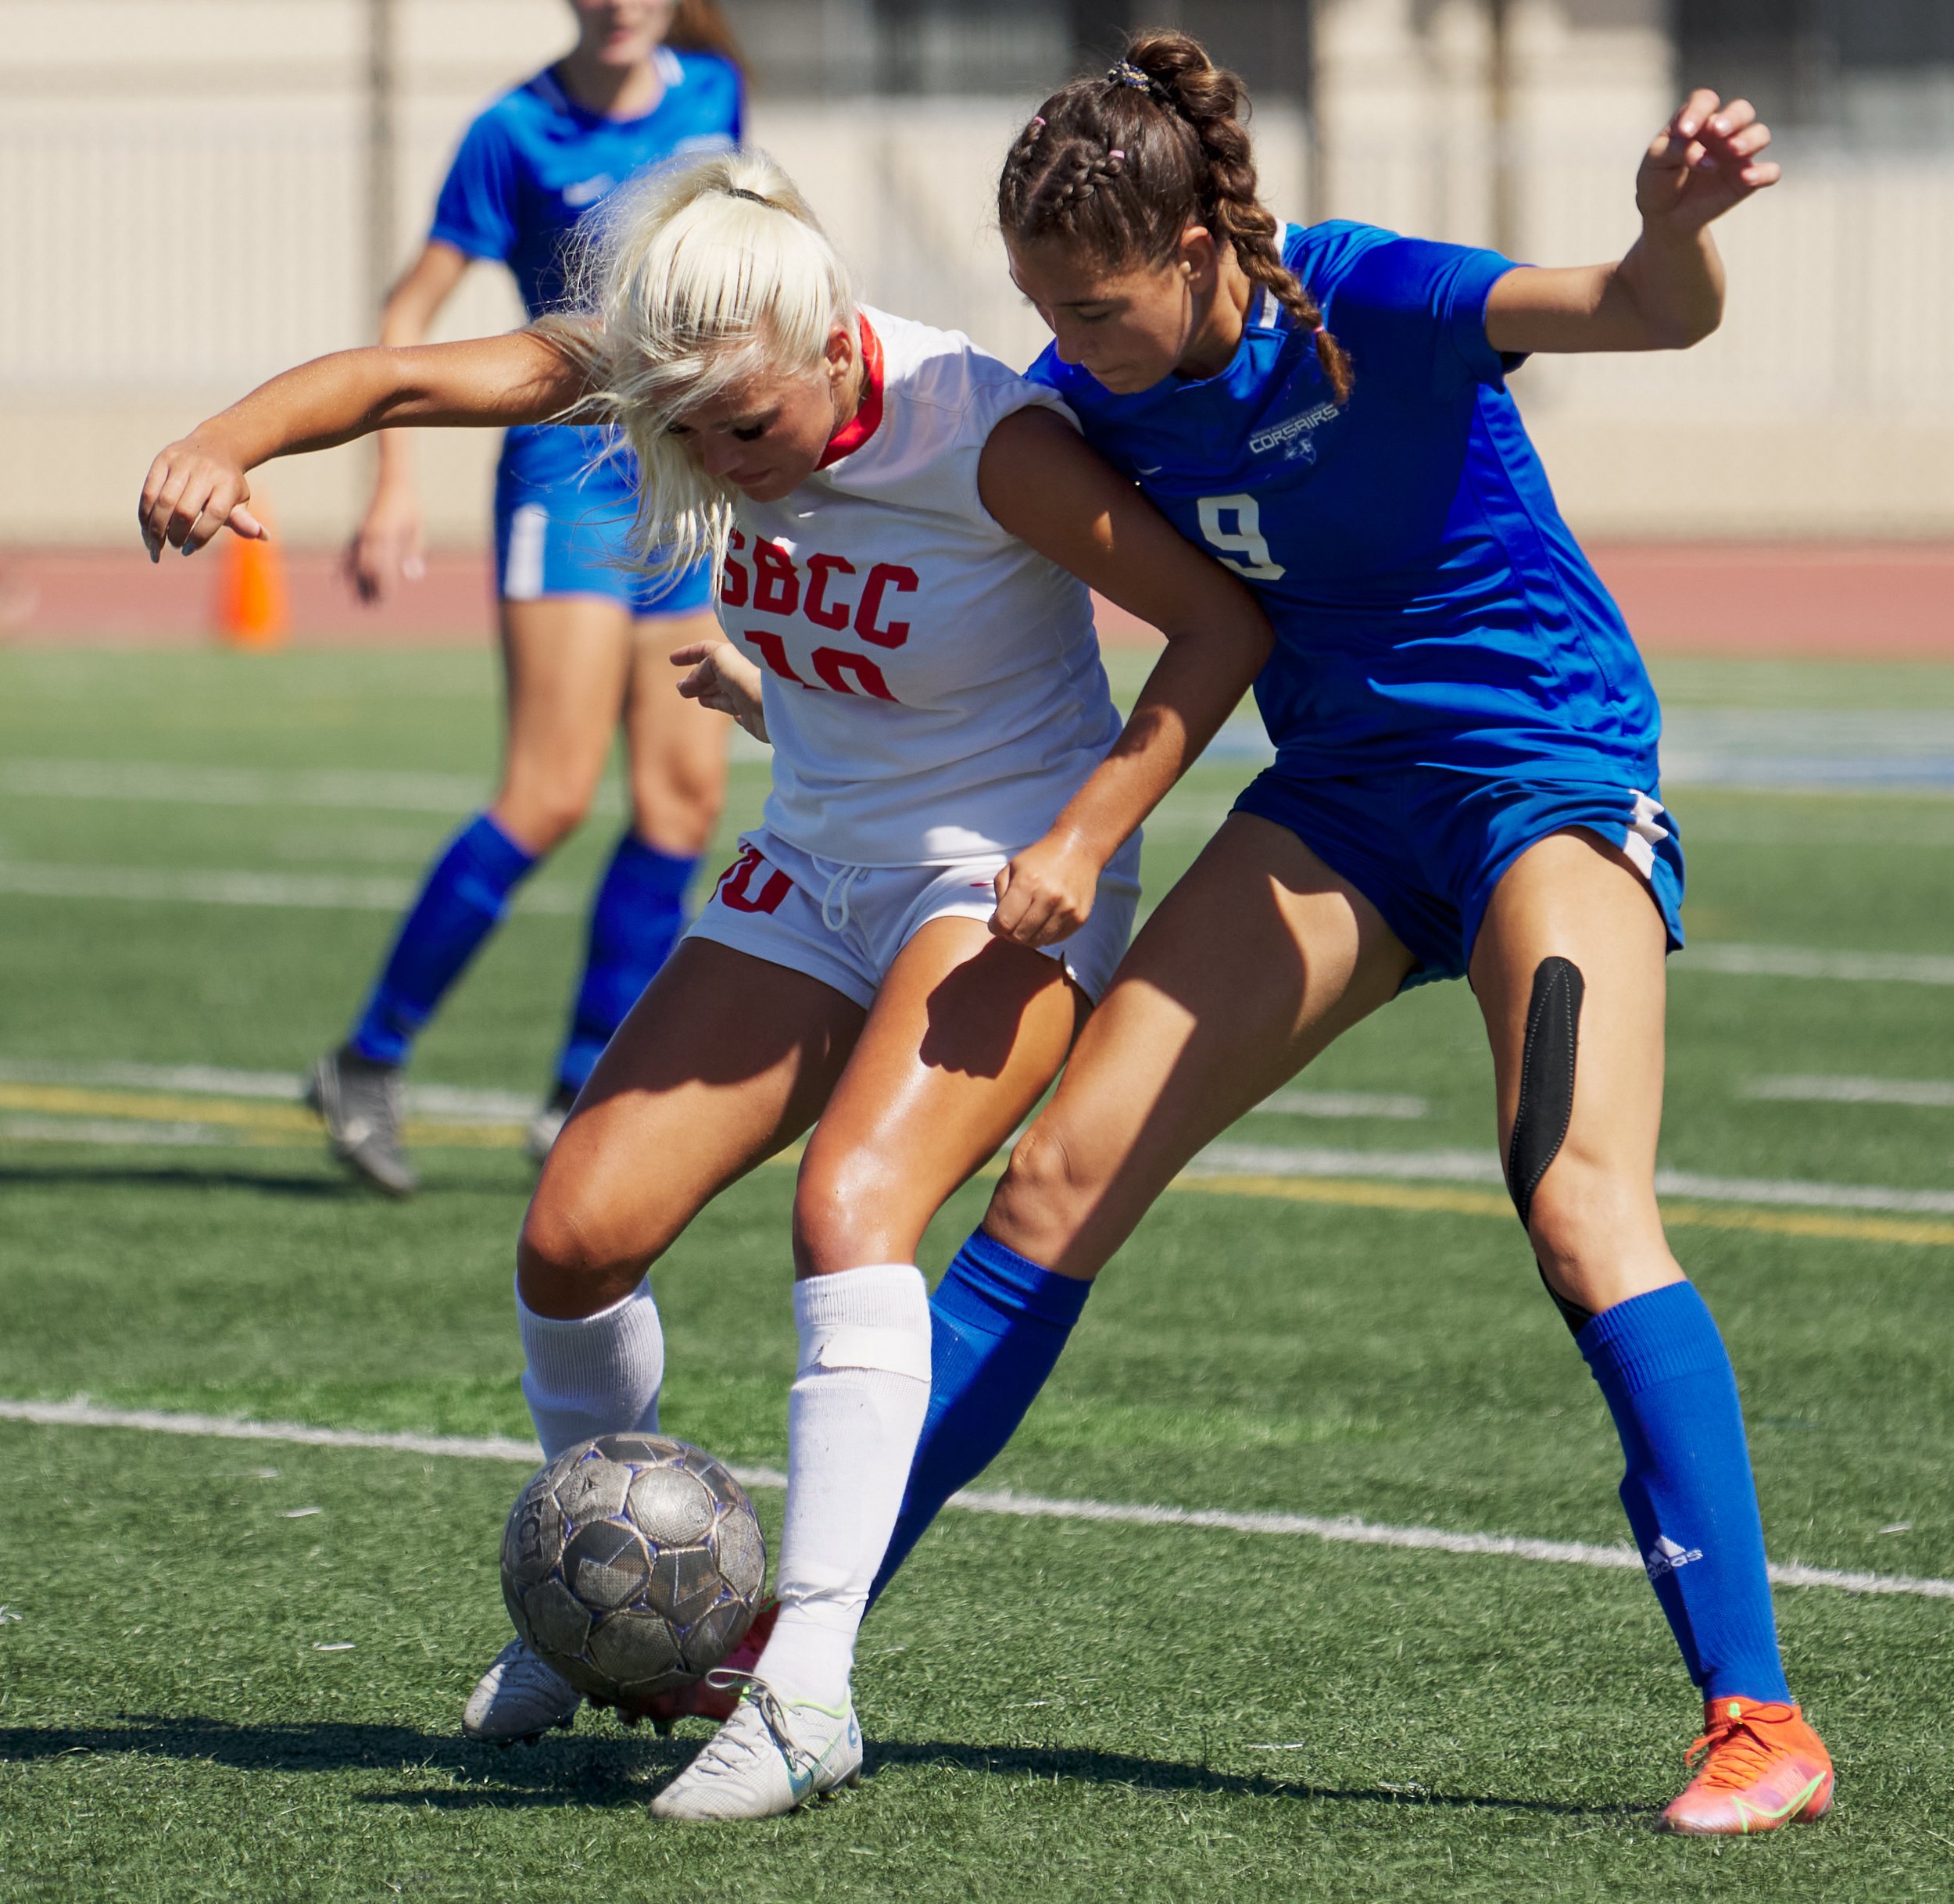  Santa Monica College Corsairs' Alexia Mallahi (right) tries to steall the ball from Santa Barbara City College Vaqueros' Helene Lervik (left) during the women's soccer game on Tuesday, Sept. 20, 2022, at Corsair Field in Santa Monica, Calif. The gam